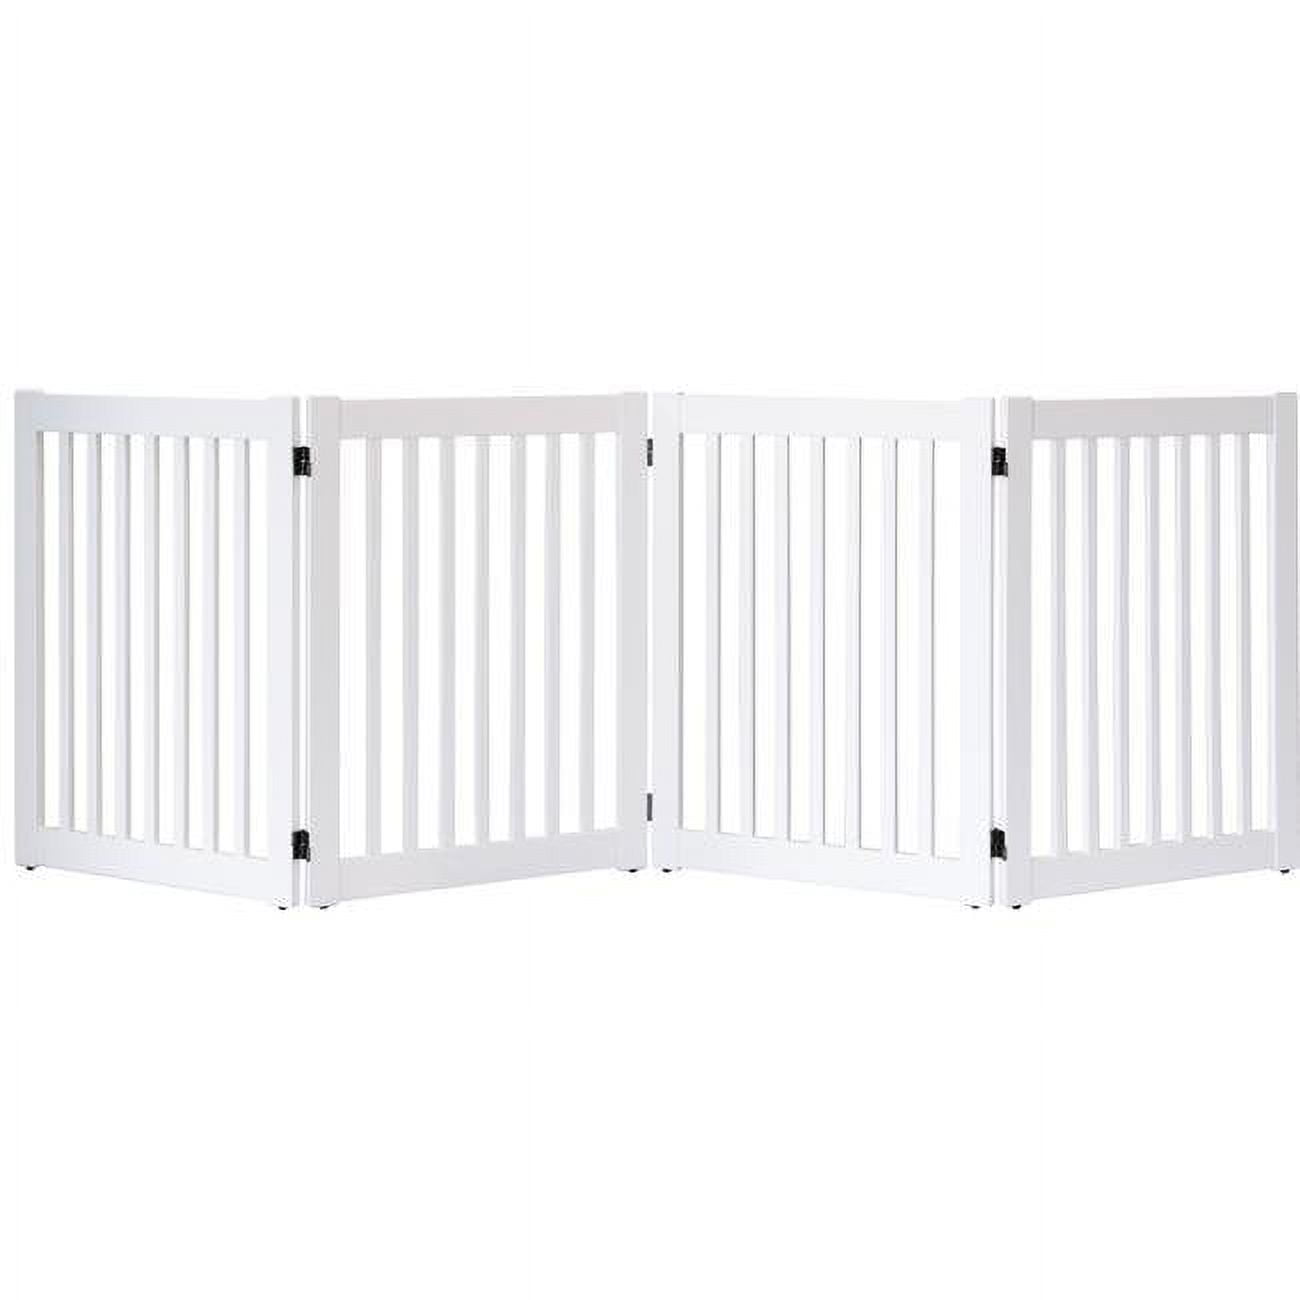 Dynamic Accents Da401 32 In. Highlander Series Solid Wood Pet Gate, White - 4 Panel